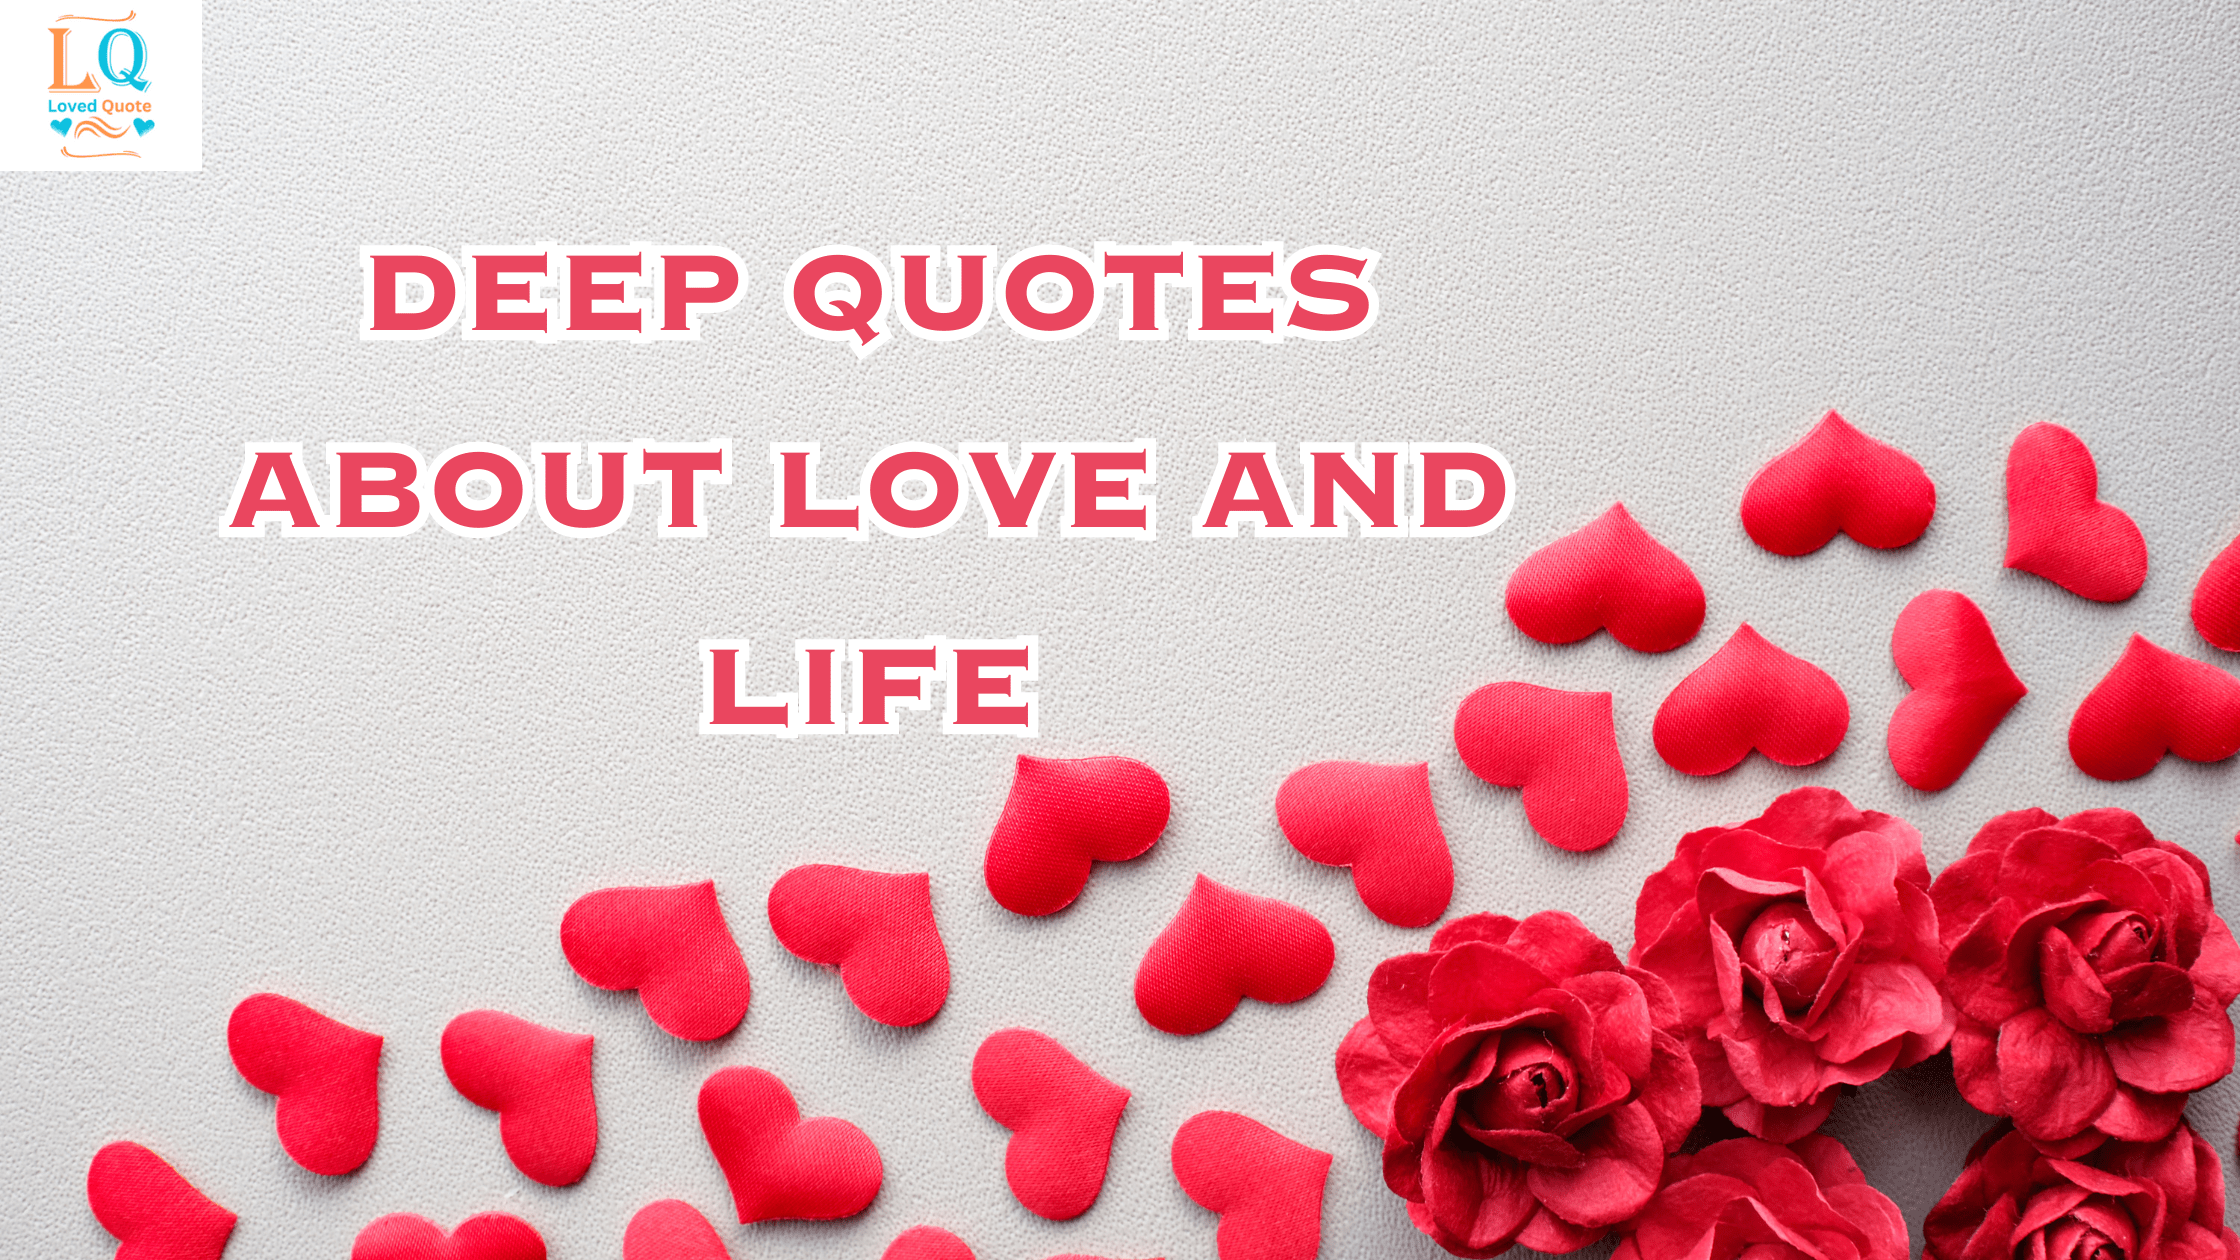 Deep Quotes About Love and Life